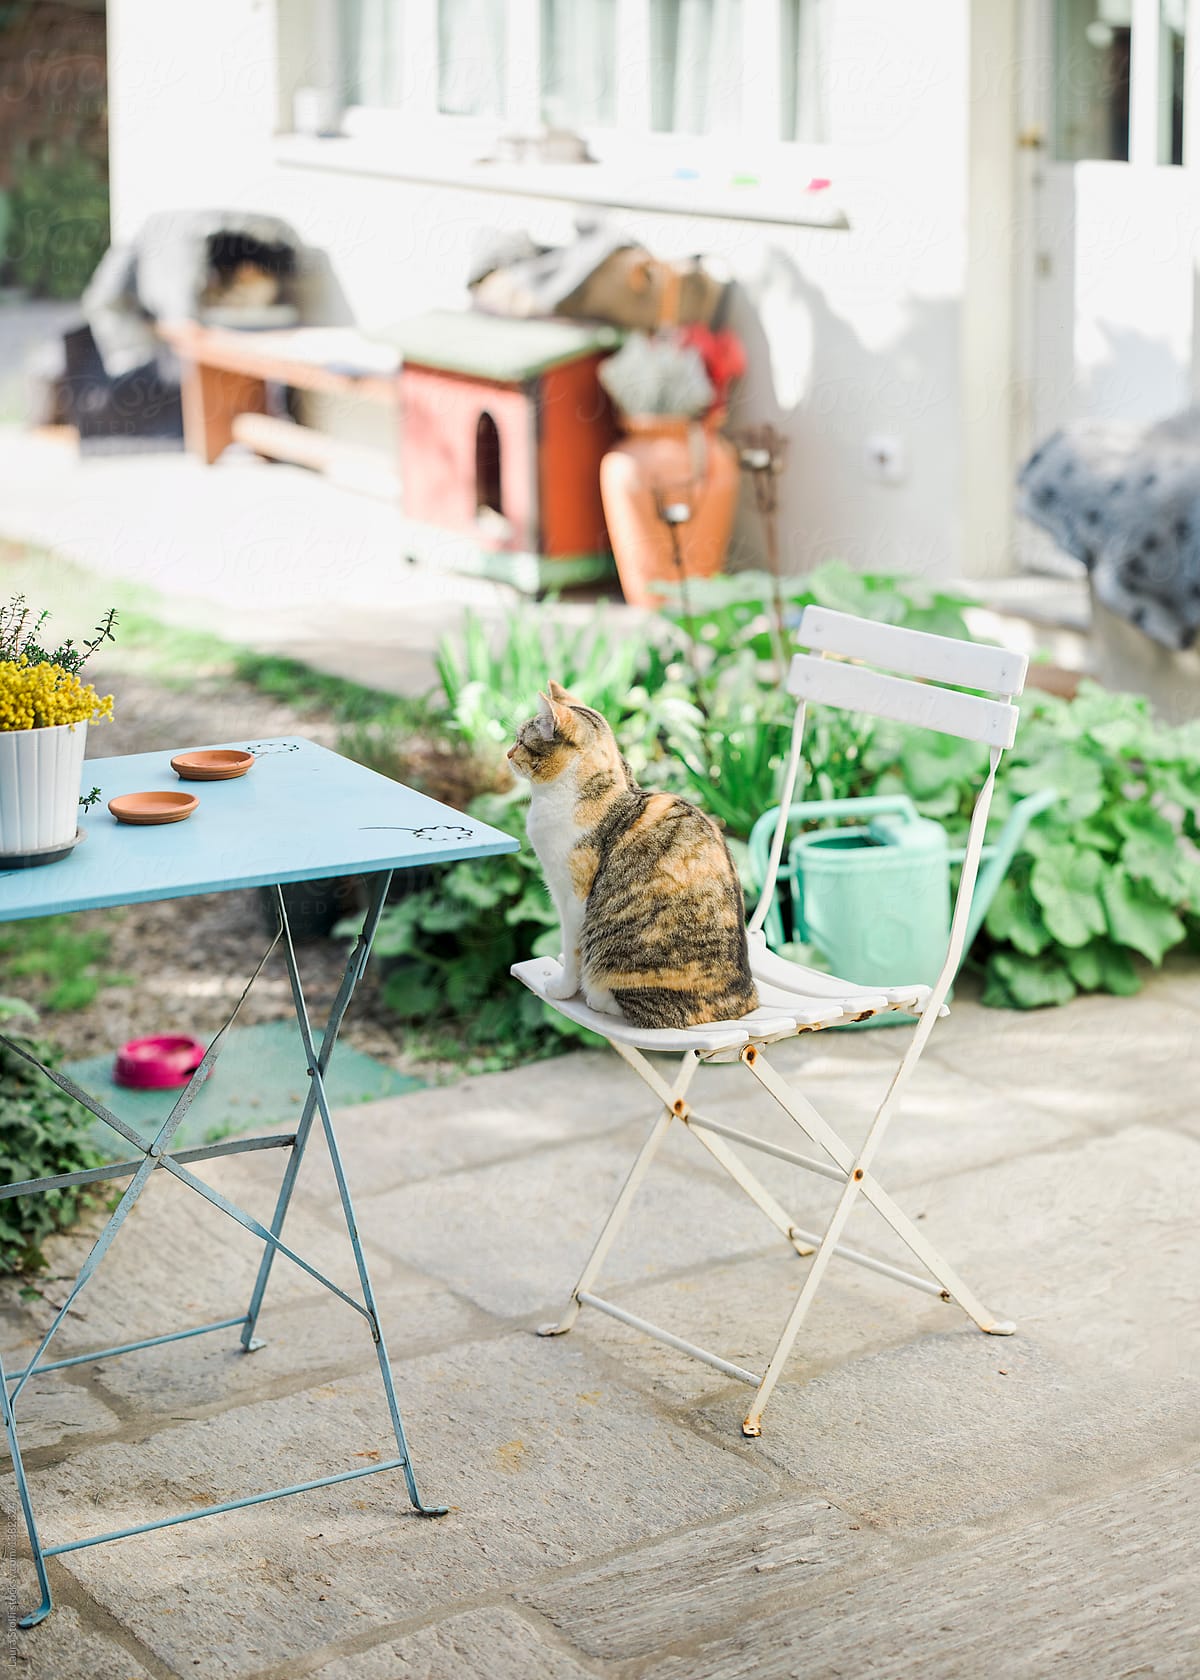 Tabby cat sits at the table in garden